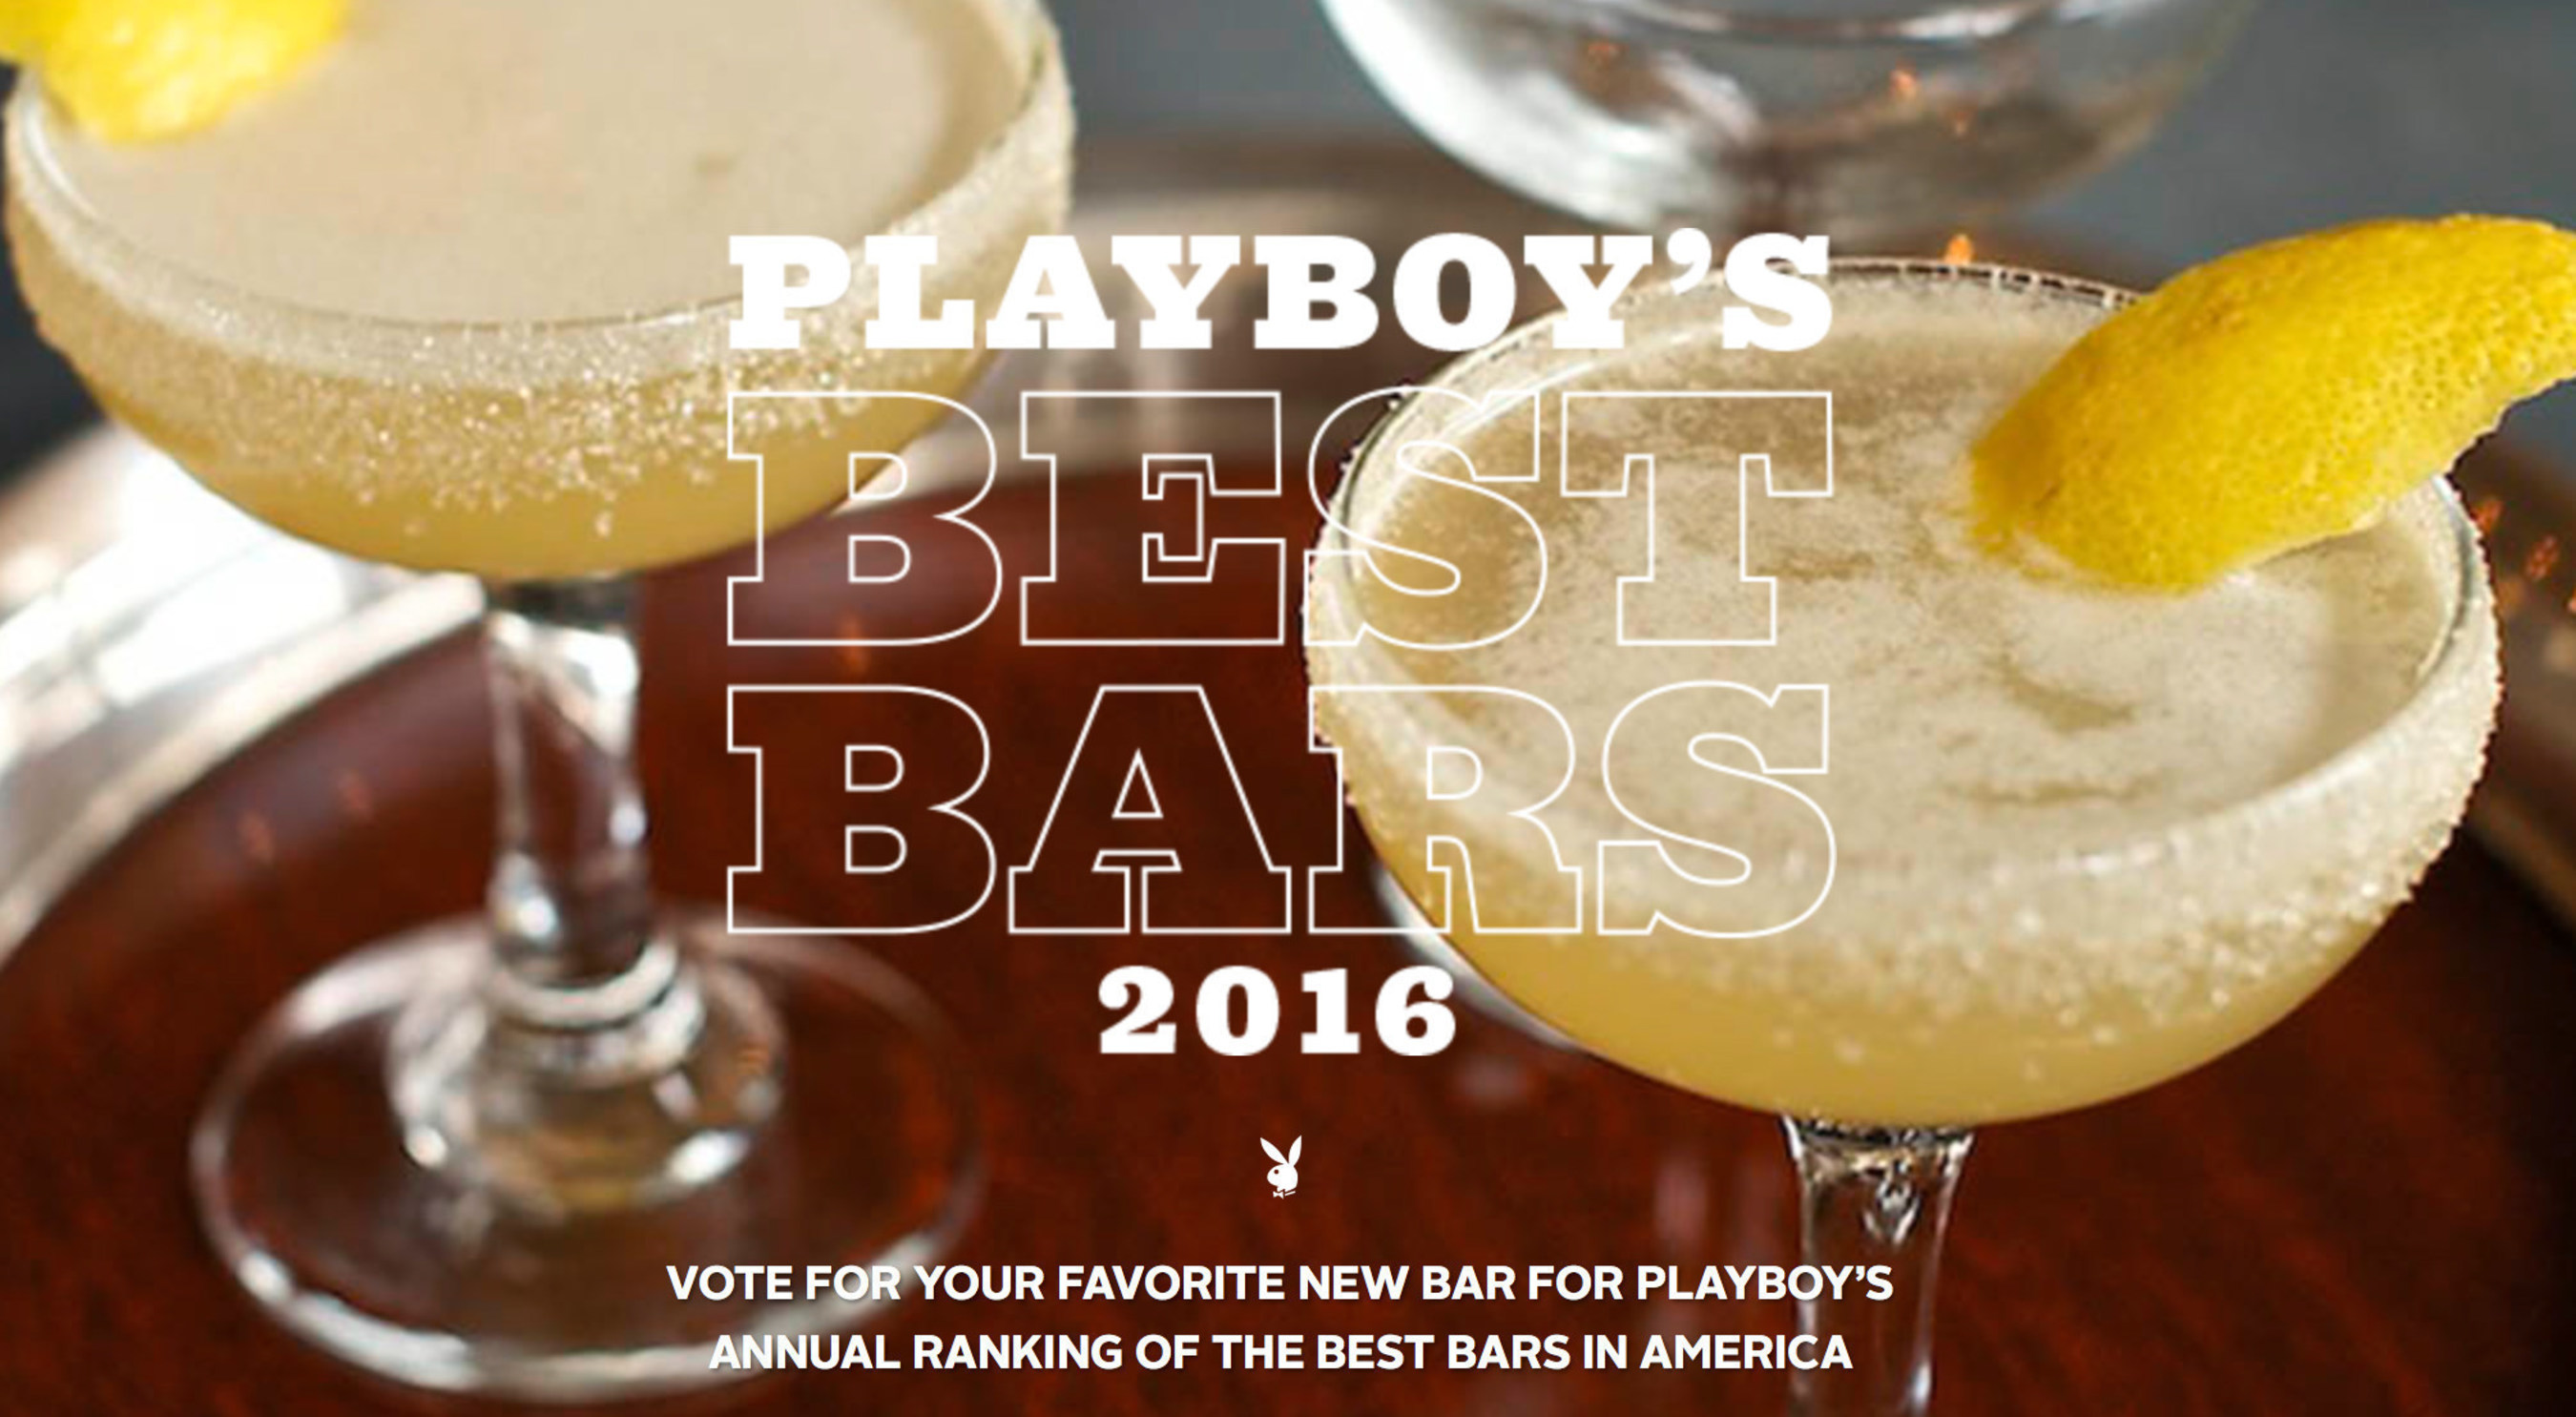 Playboy launches search to find the best new bars in America.